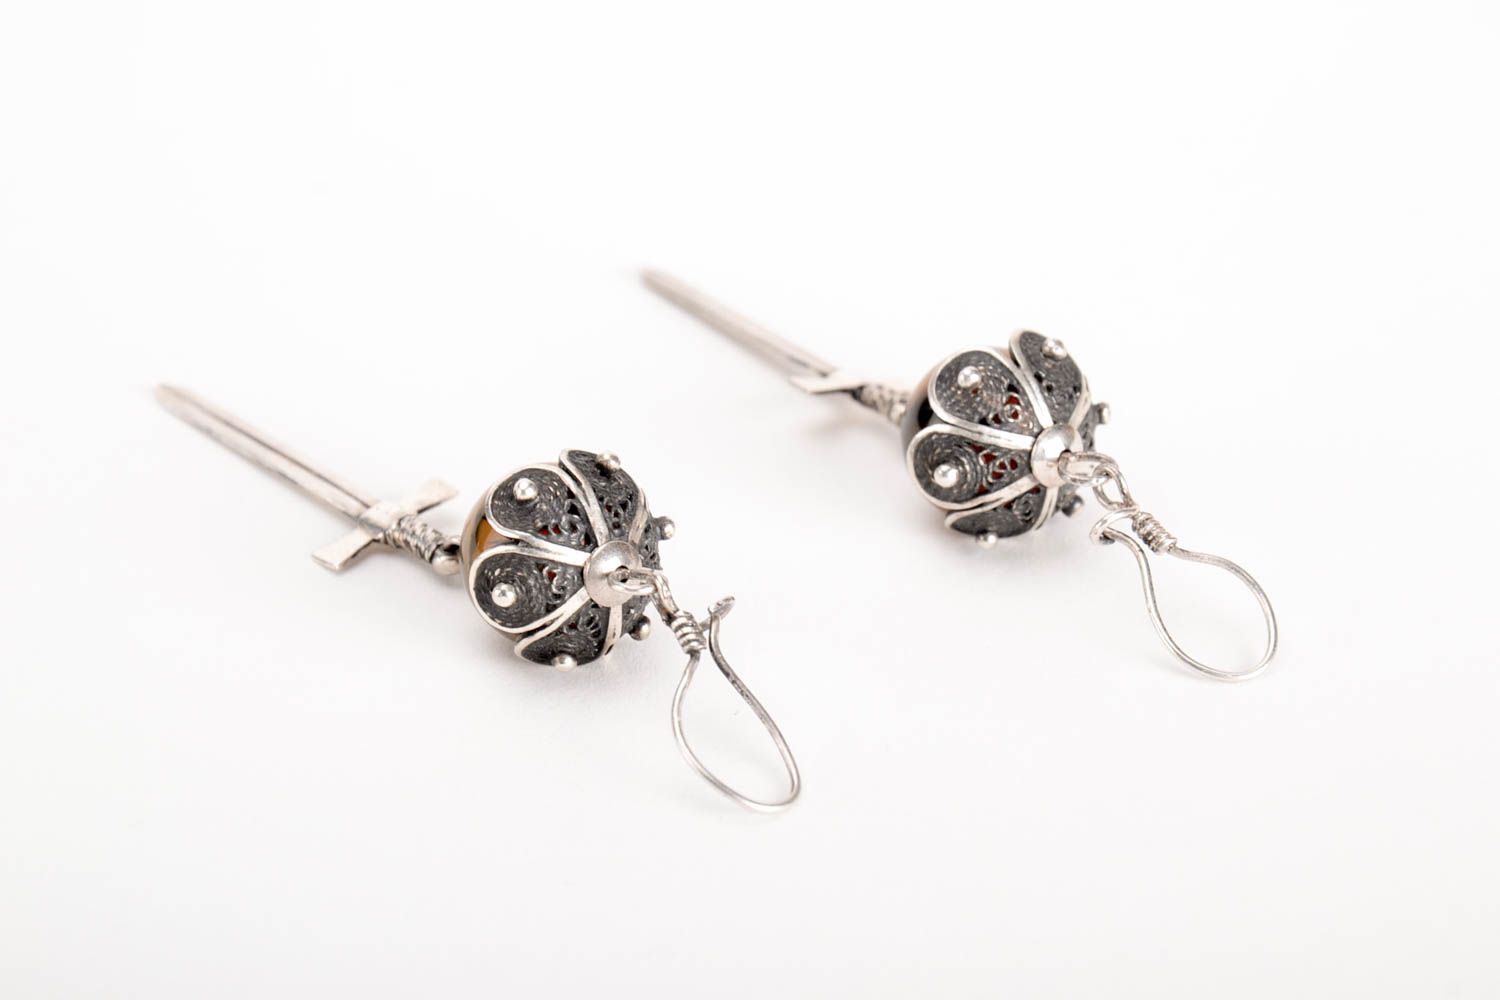 Handmade unique natural stones earrings silver jewelry stylish present for her photo 3